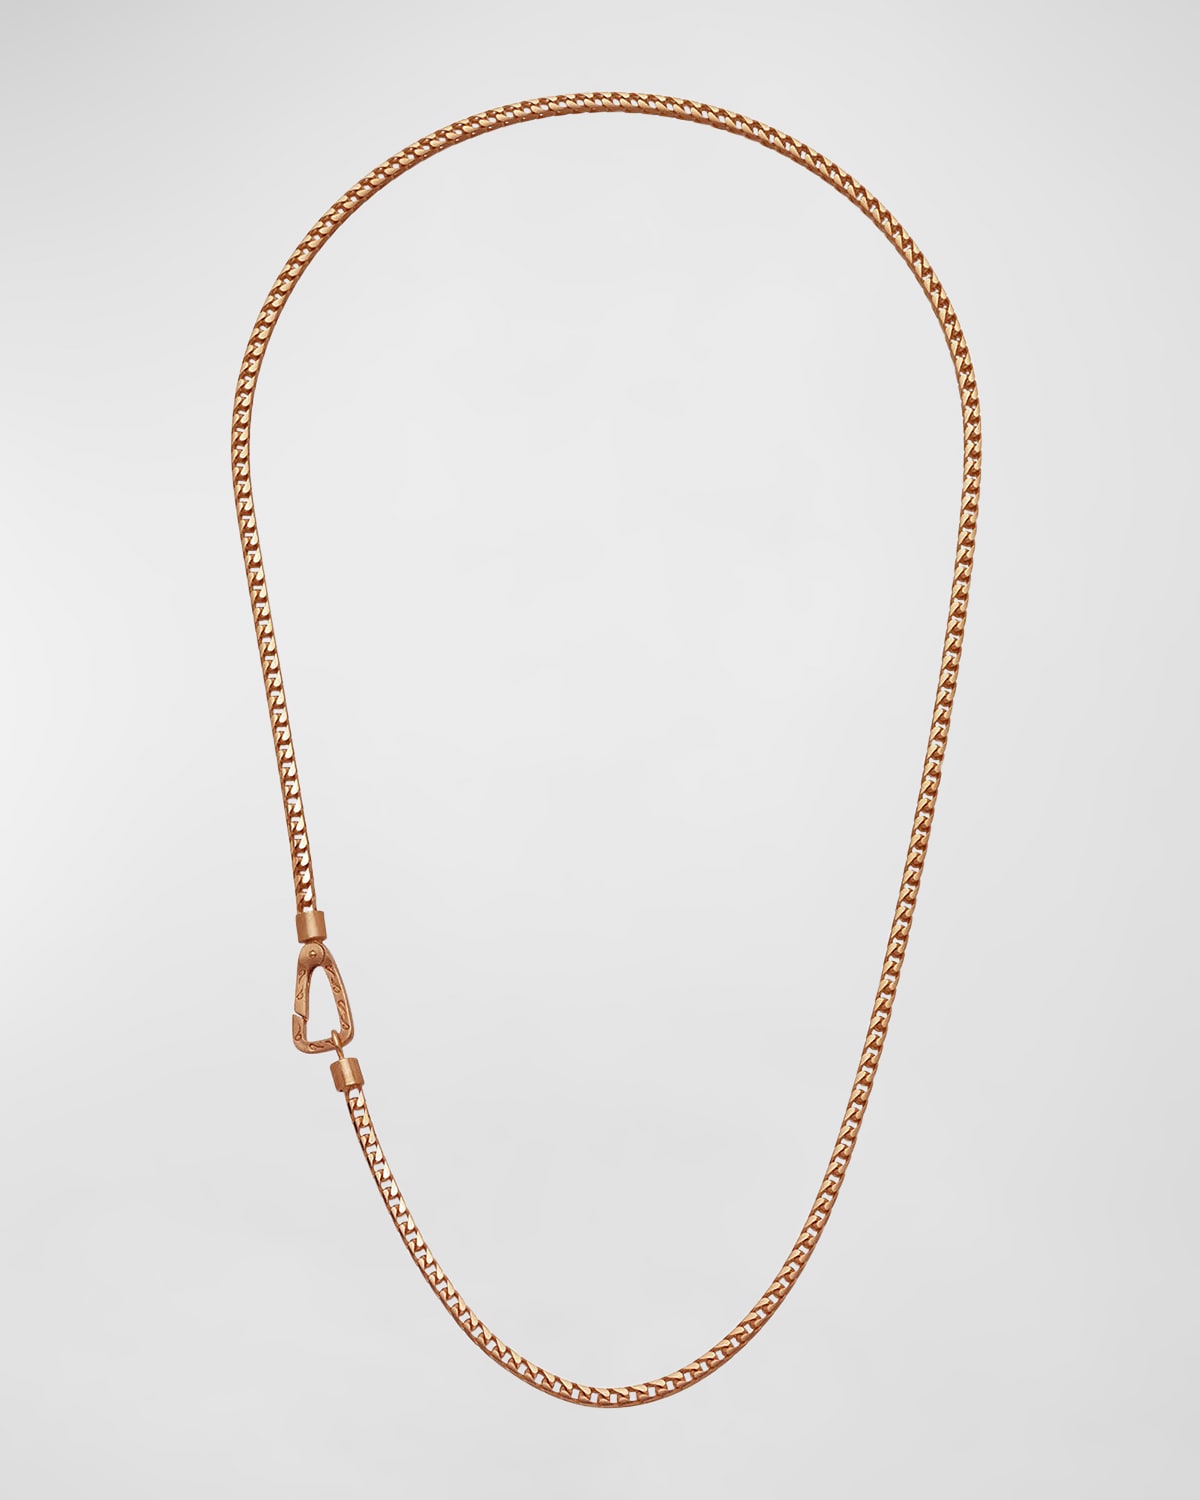 Marco Dal Maso Mesh Rose Gold Plated Silver Necklace with Matte Chain, 22"L